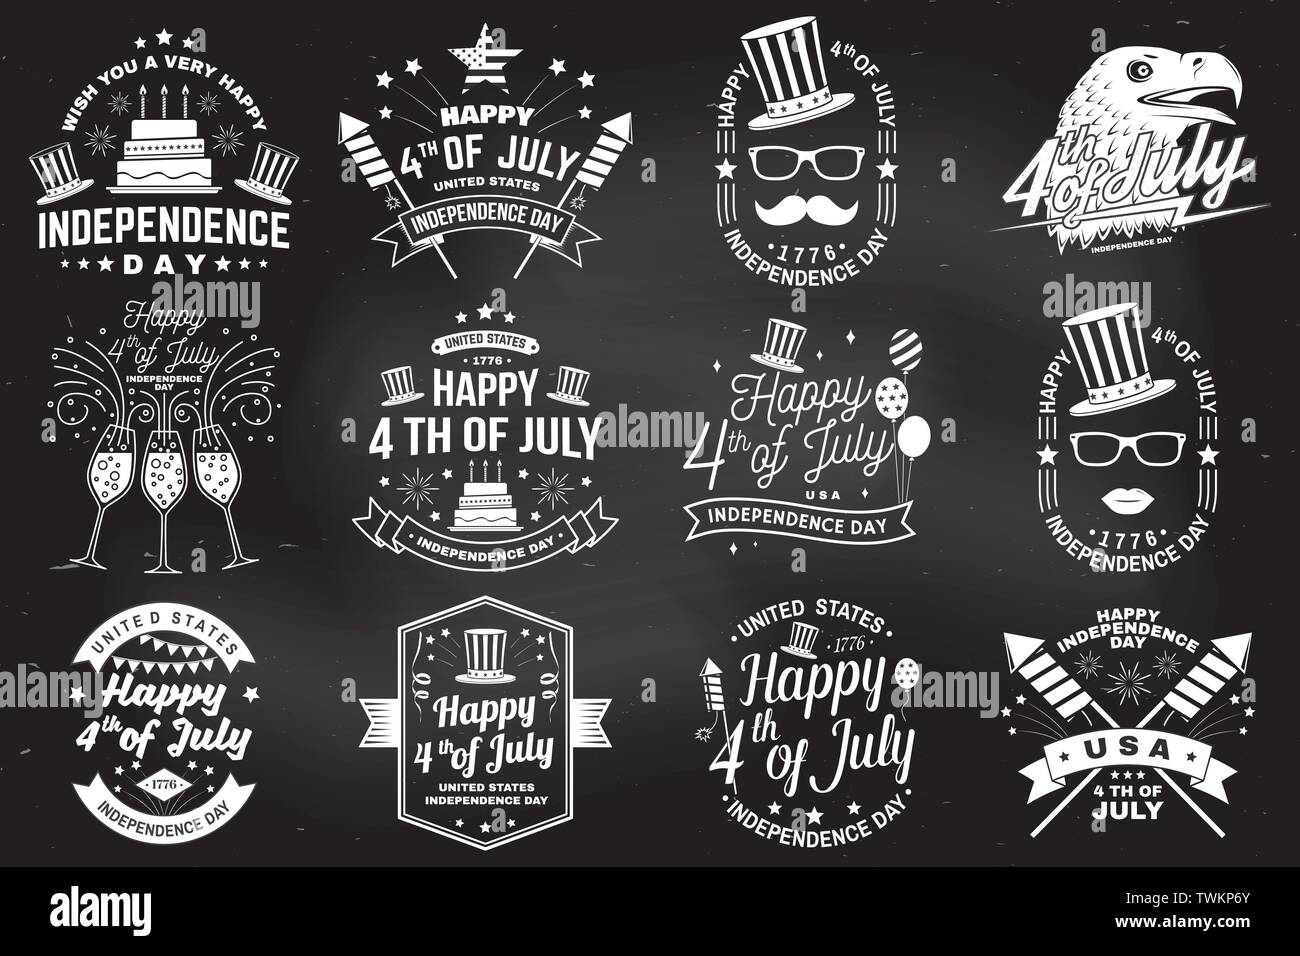 Vintage 4th of july design in retro style. Fourth of July felicitation classic postcard. Independence day greeting card. Patriotic banner for website template. Vector illustration on the chalkboard. Stock Vector